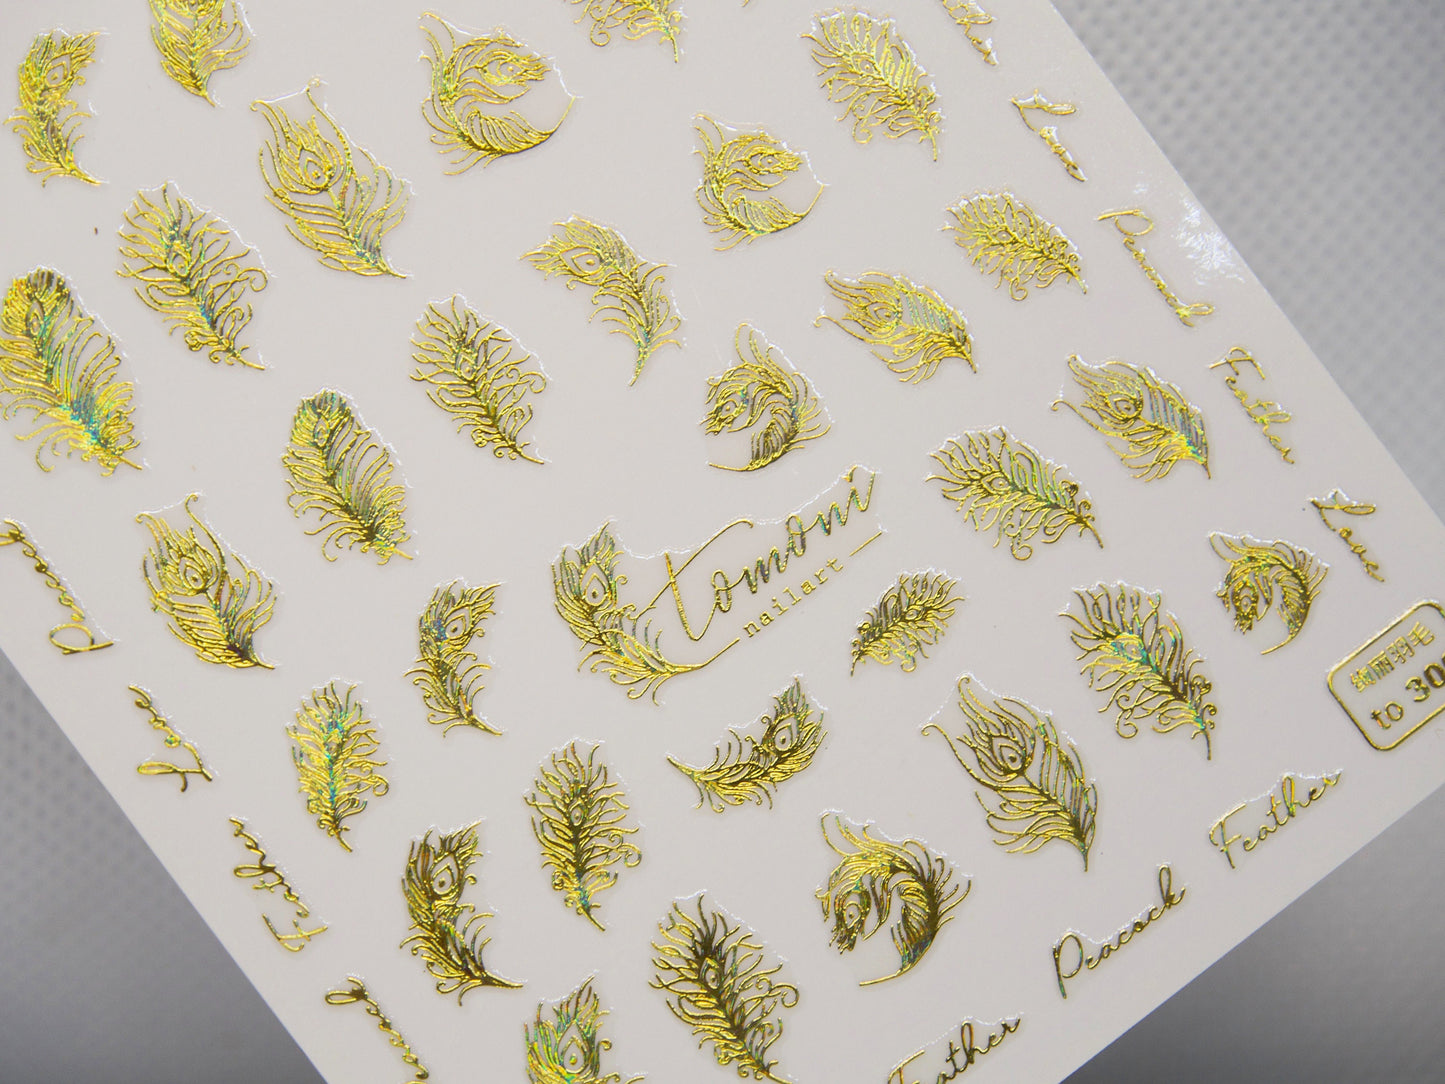 Ultra Thin Gold Silver Feather nail sticker/ 3D Nail Art Stickers Self Adhesive Decals/ Feathers Nail Metallic Royal Design Easy Peel Off